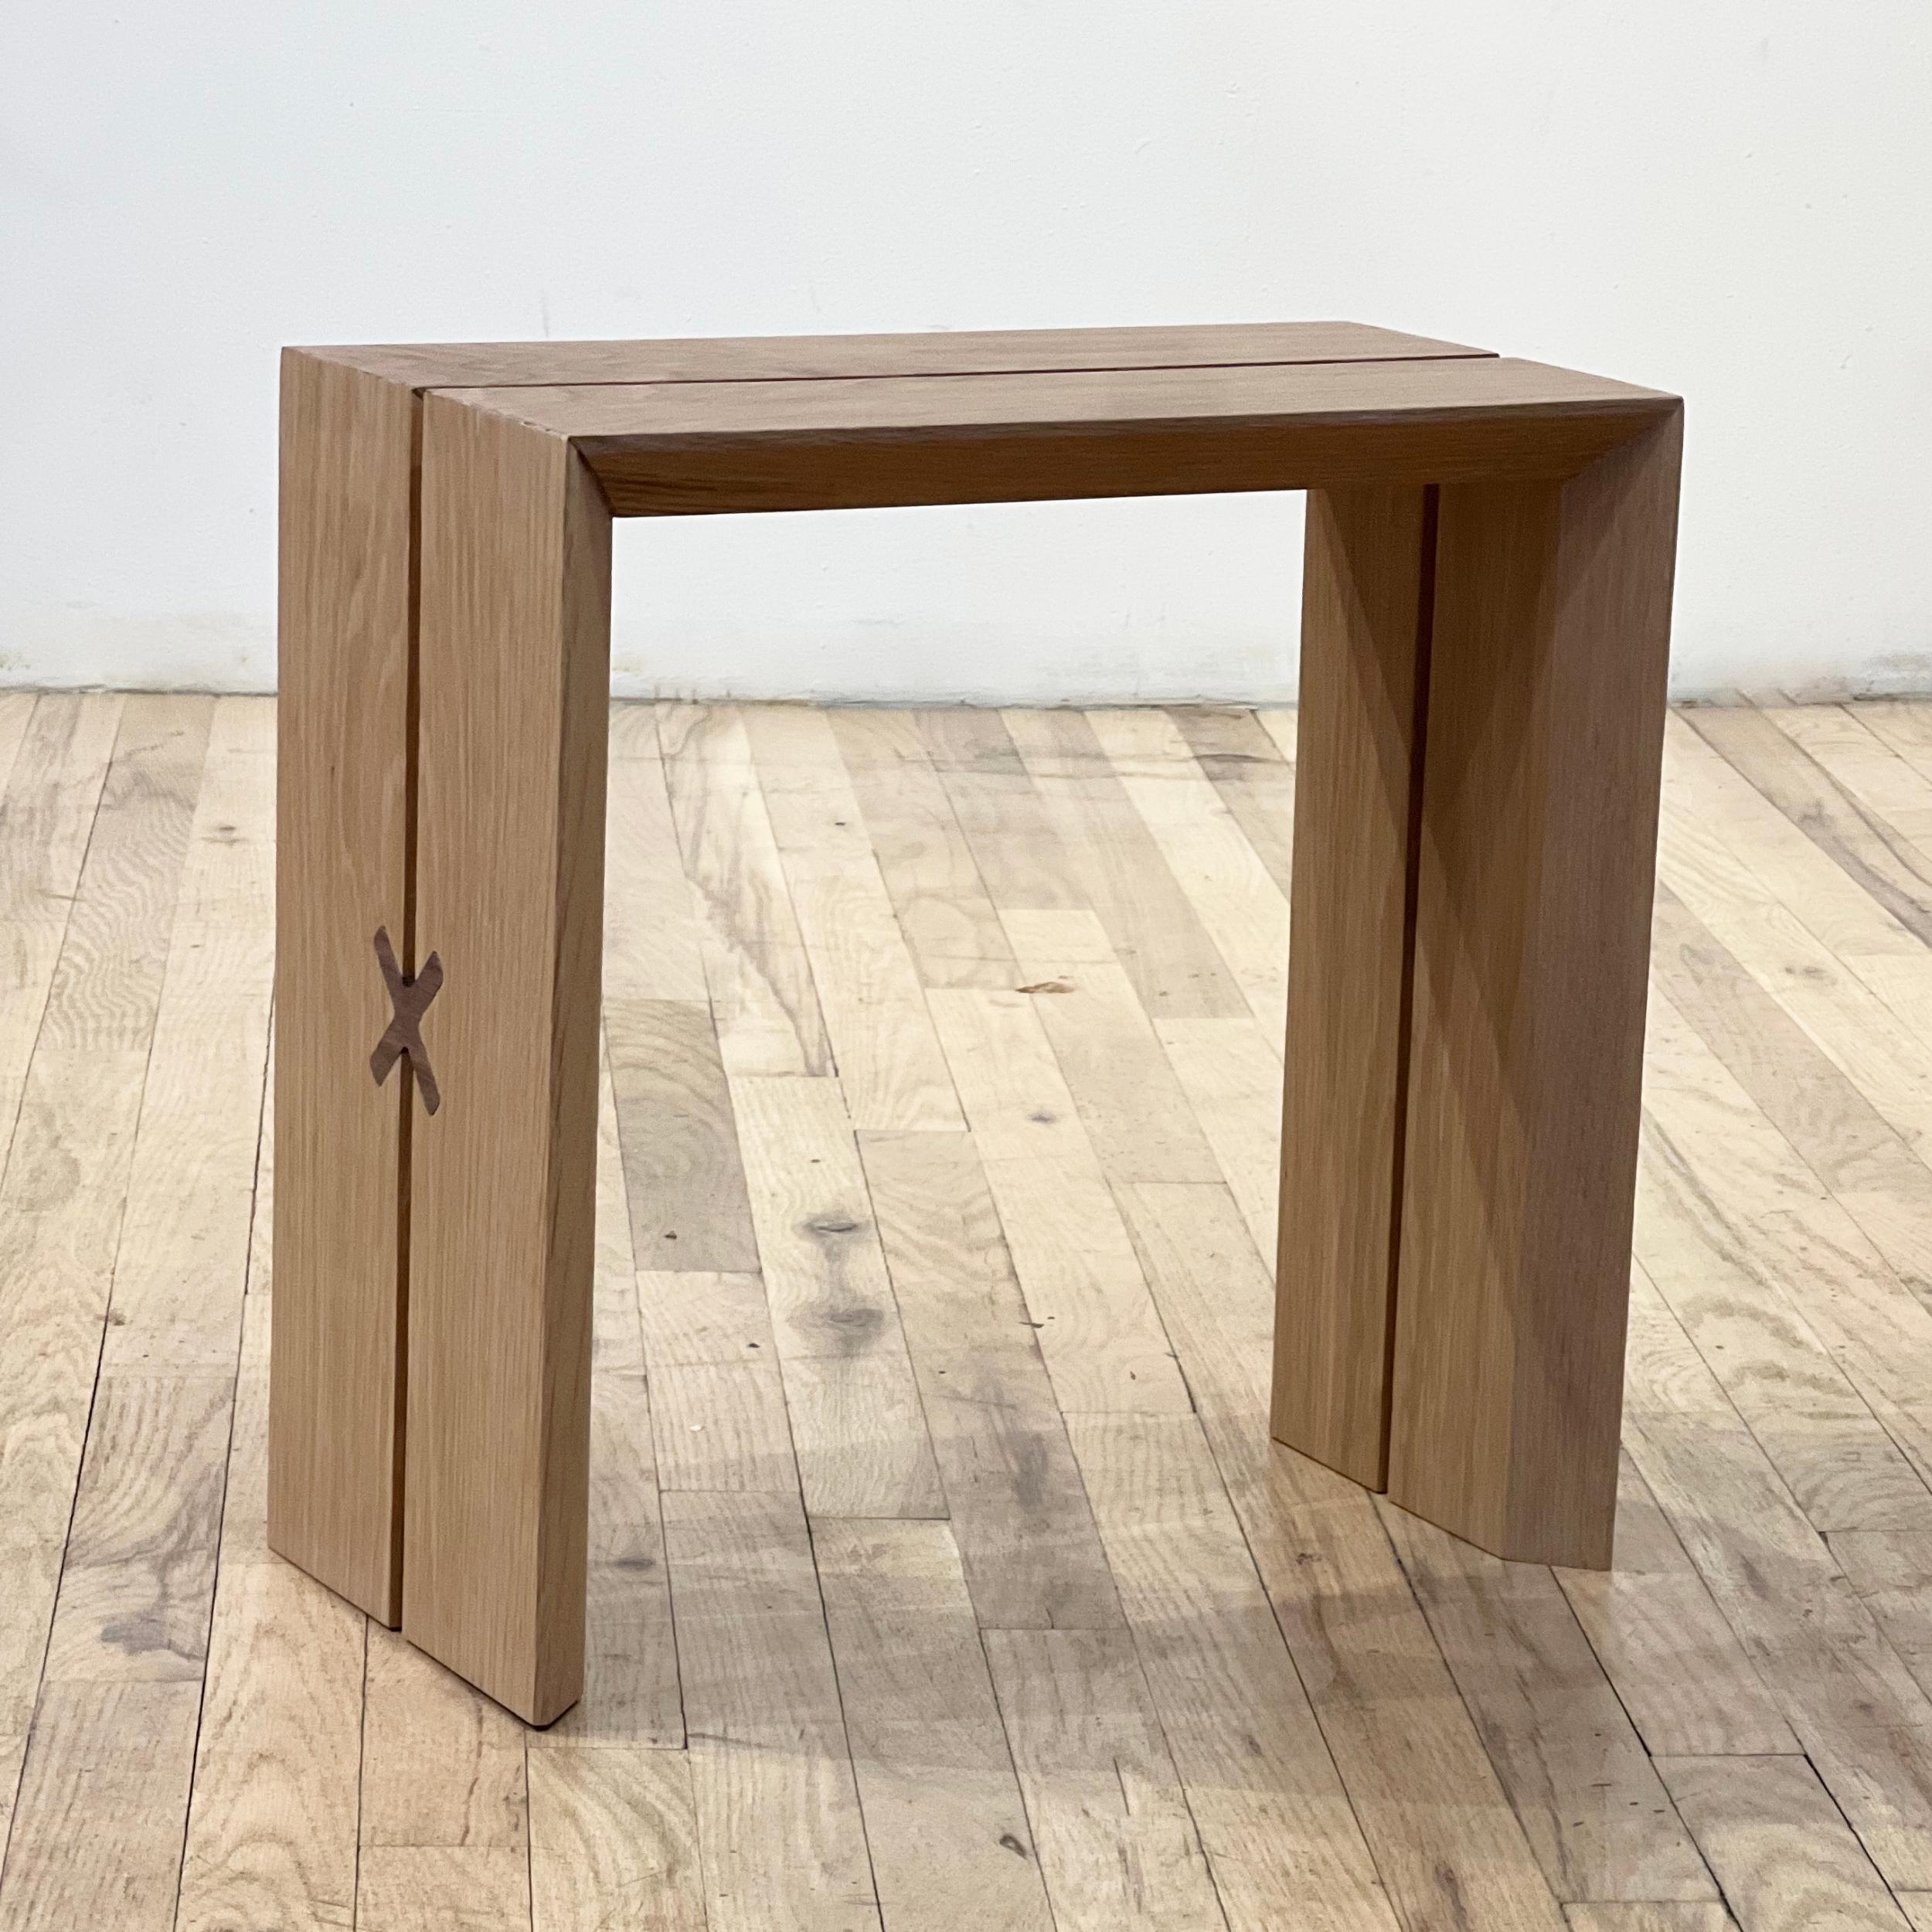 With this stool, we wanted to push the limits of structure both in physics and aesthetics.
The stool is sawn from a single long hand-selected board and carefully milled with a miter joint detail that cascades from the seat down through the legs.